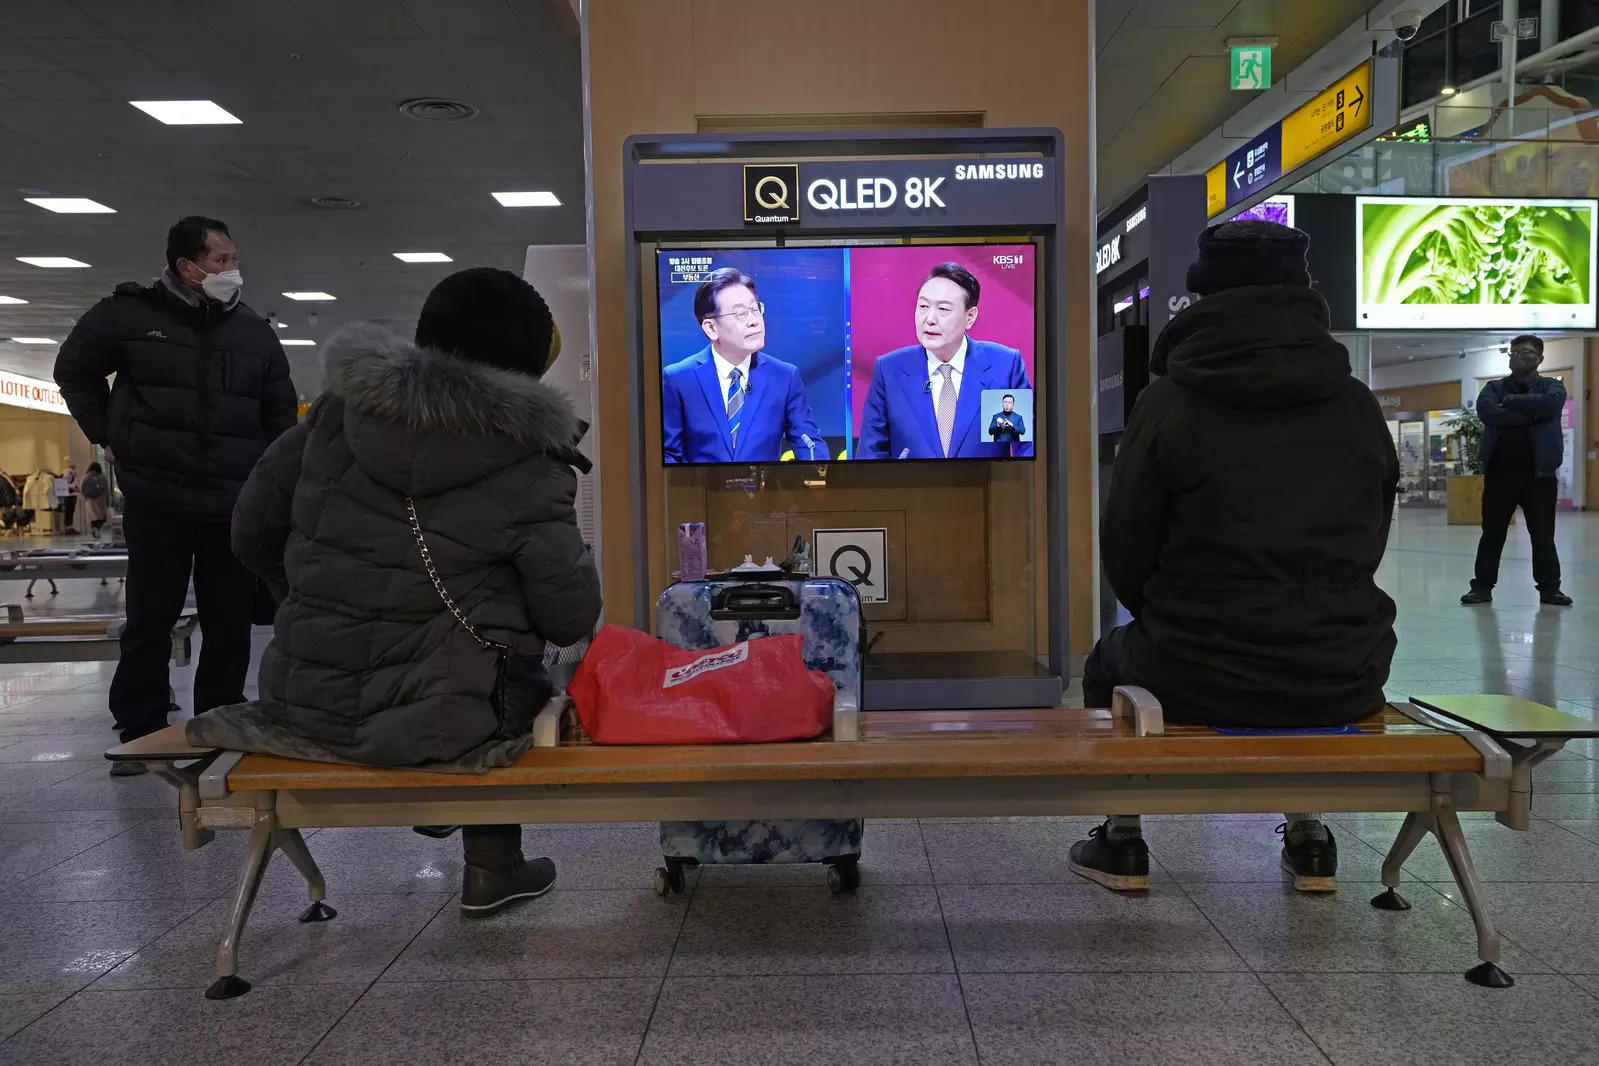 A screen shows a live broadcast of Lee Jae-myung of the ruling Democratic Party, left, and Yoon Suk Yeol of the main opposition People Power Party during a presidential debate. (AP Photo/Ahn Young-joon)